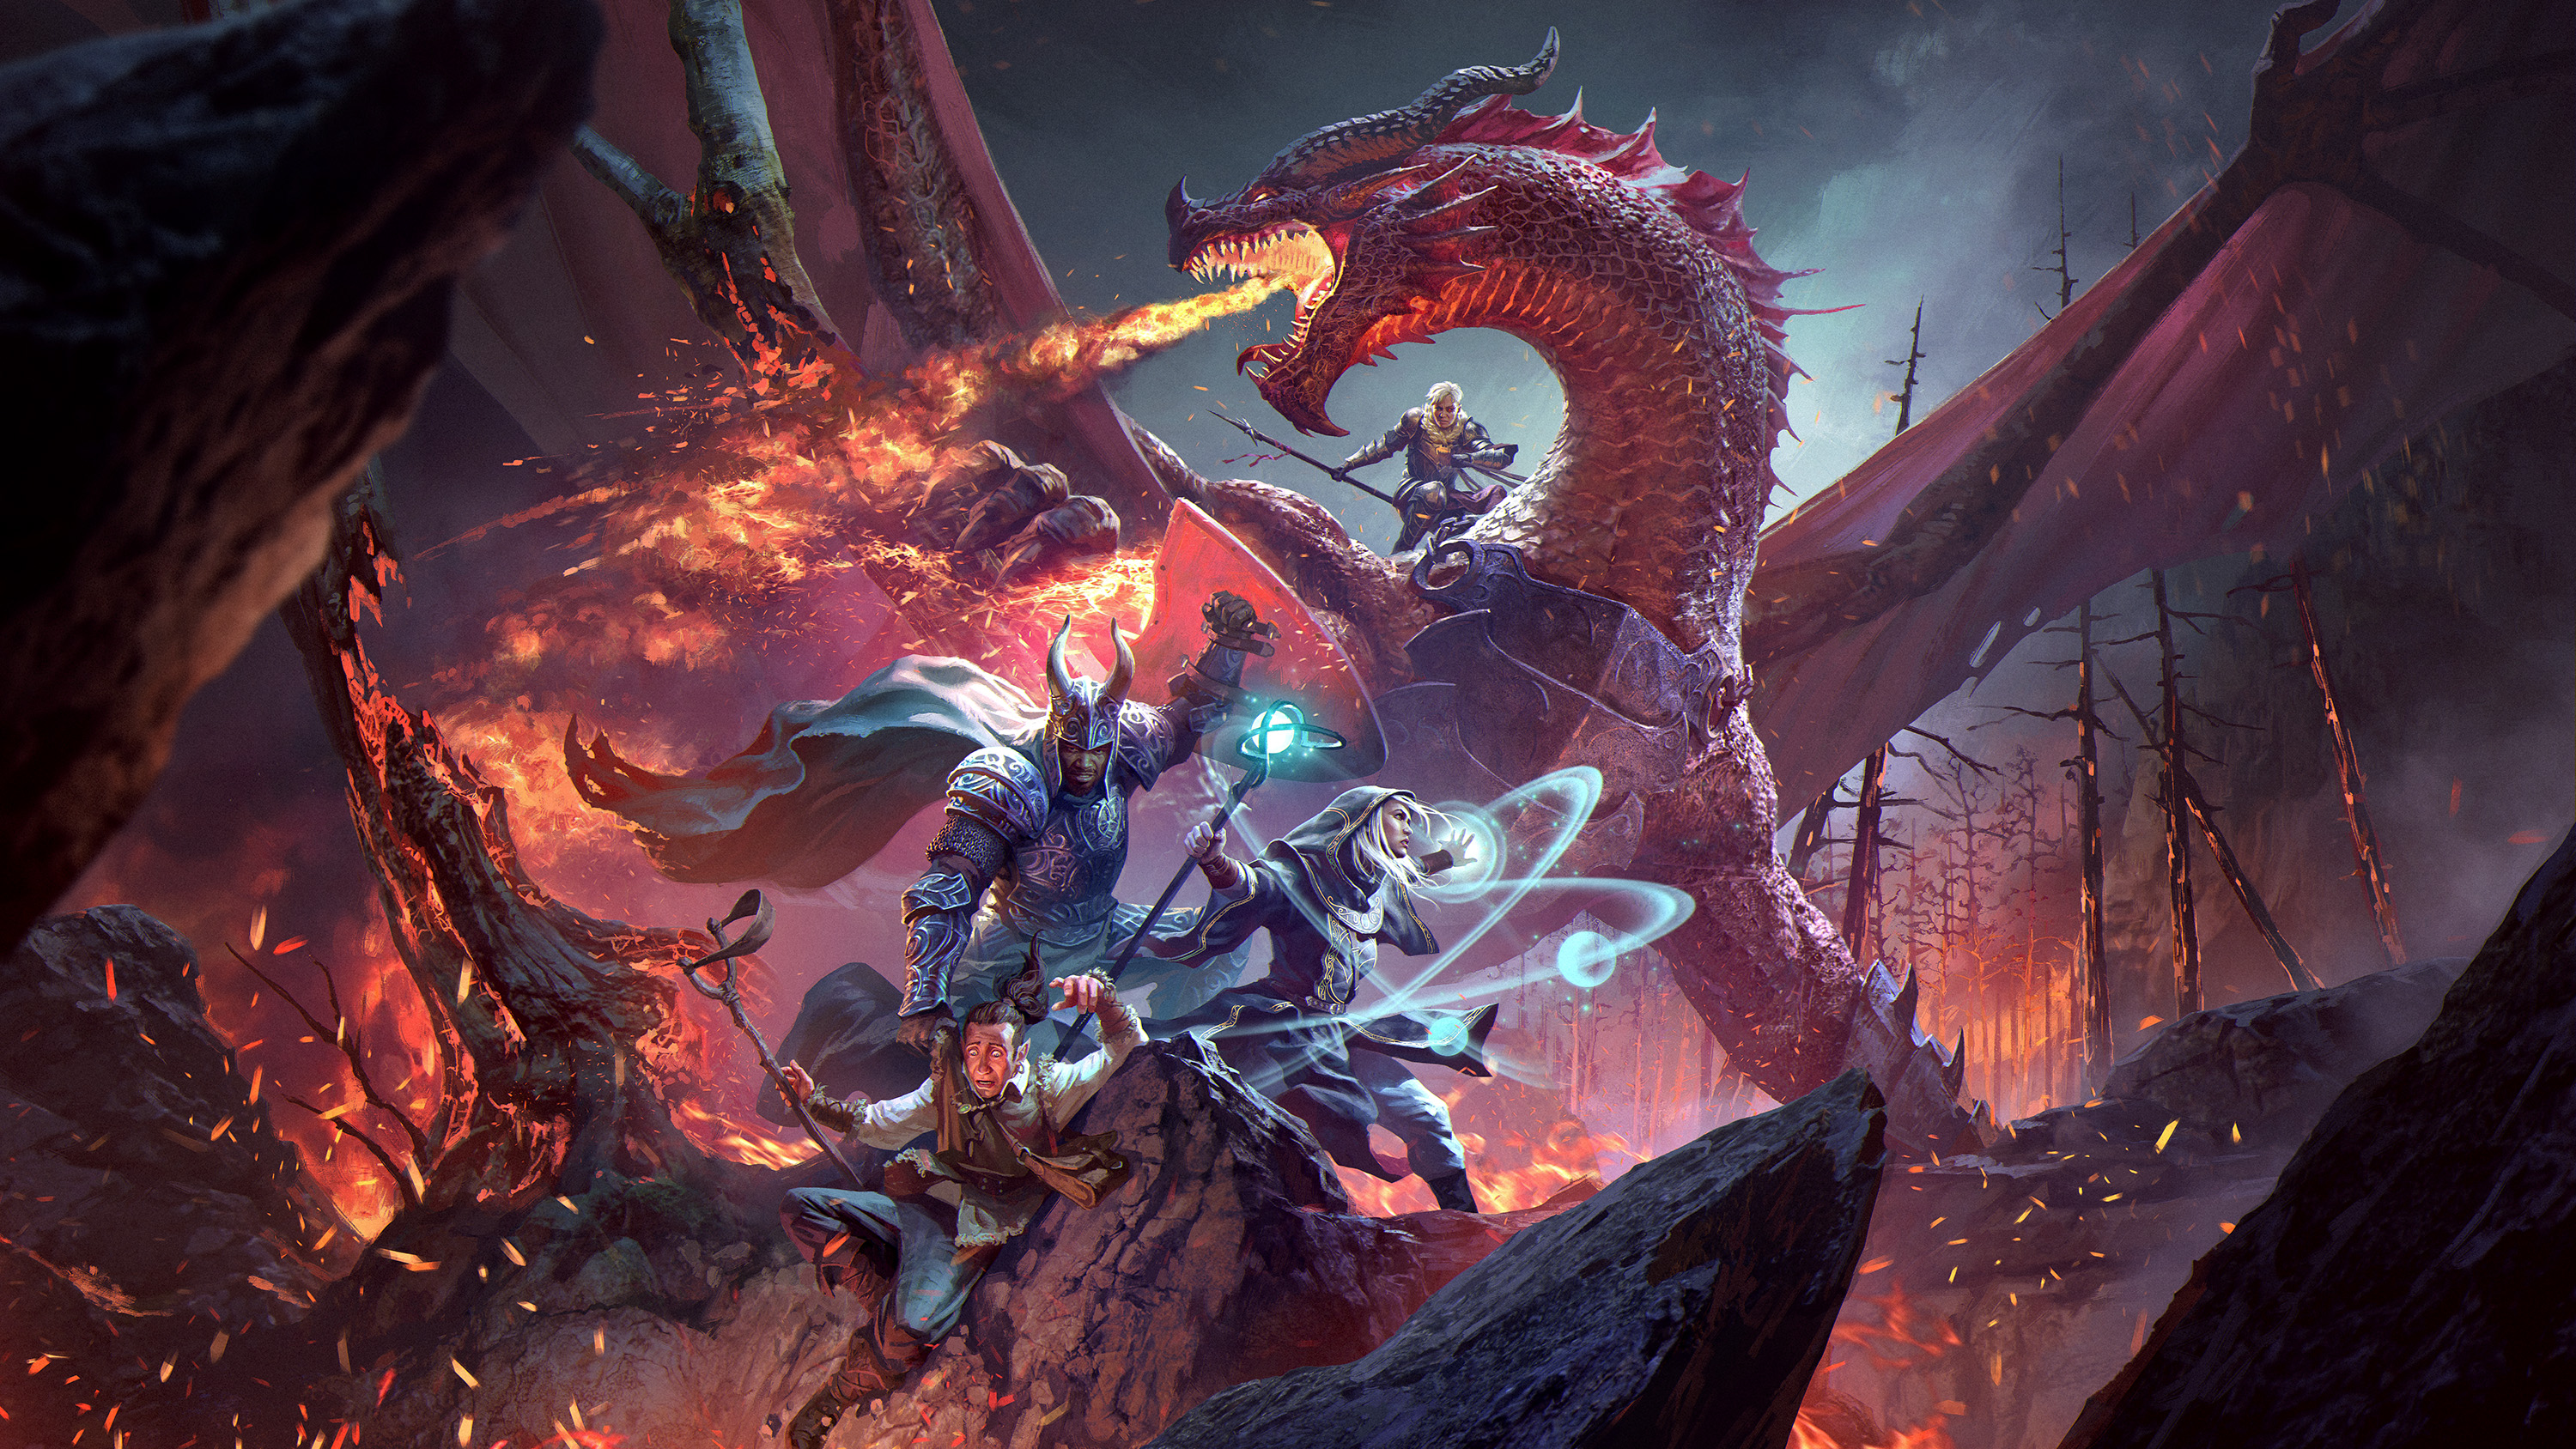 Three heroes grapple on a cliff’s edge as a red dragon breathes fire above them. The woods in the background is charred, a dragon rider searches the landscape.